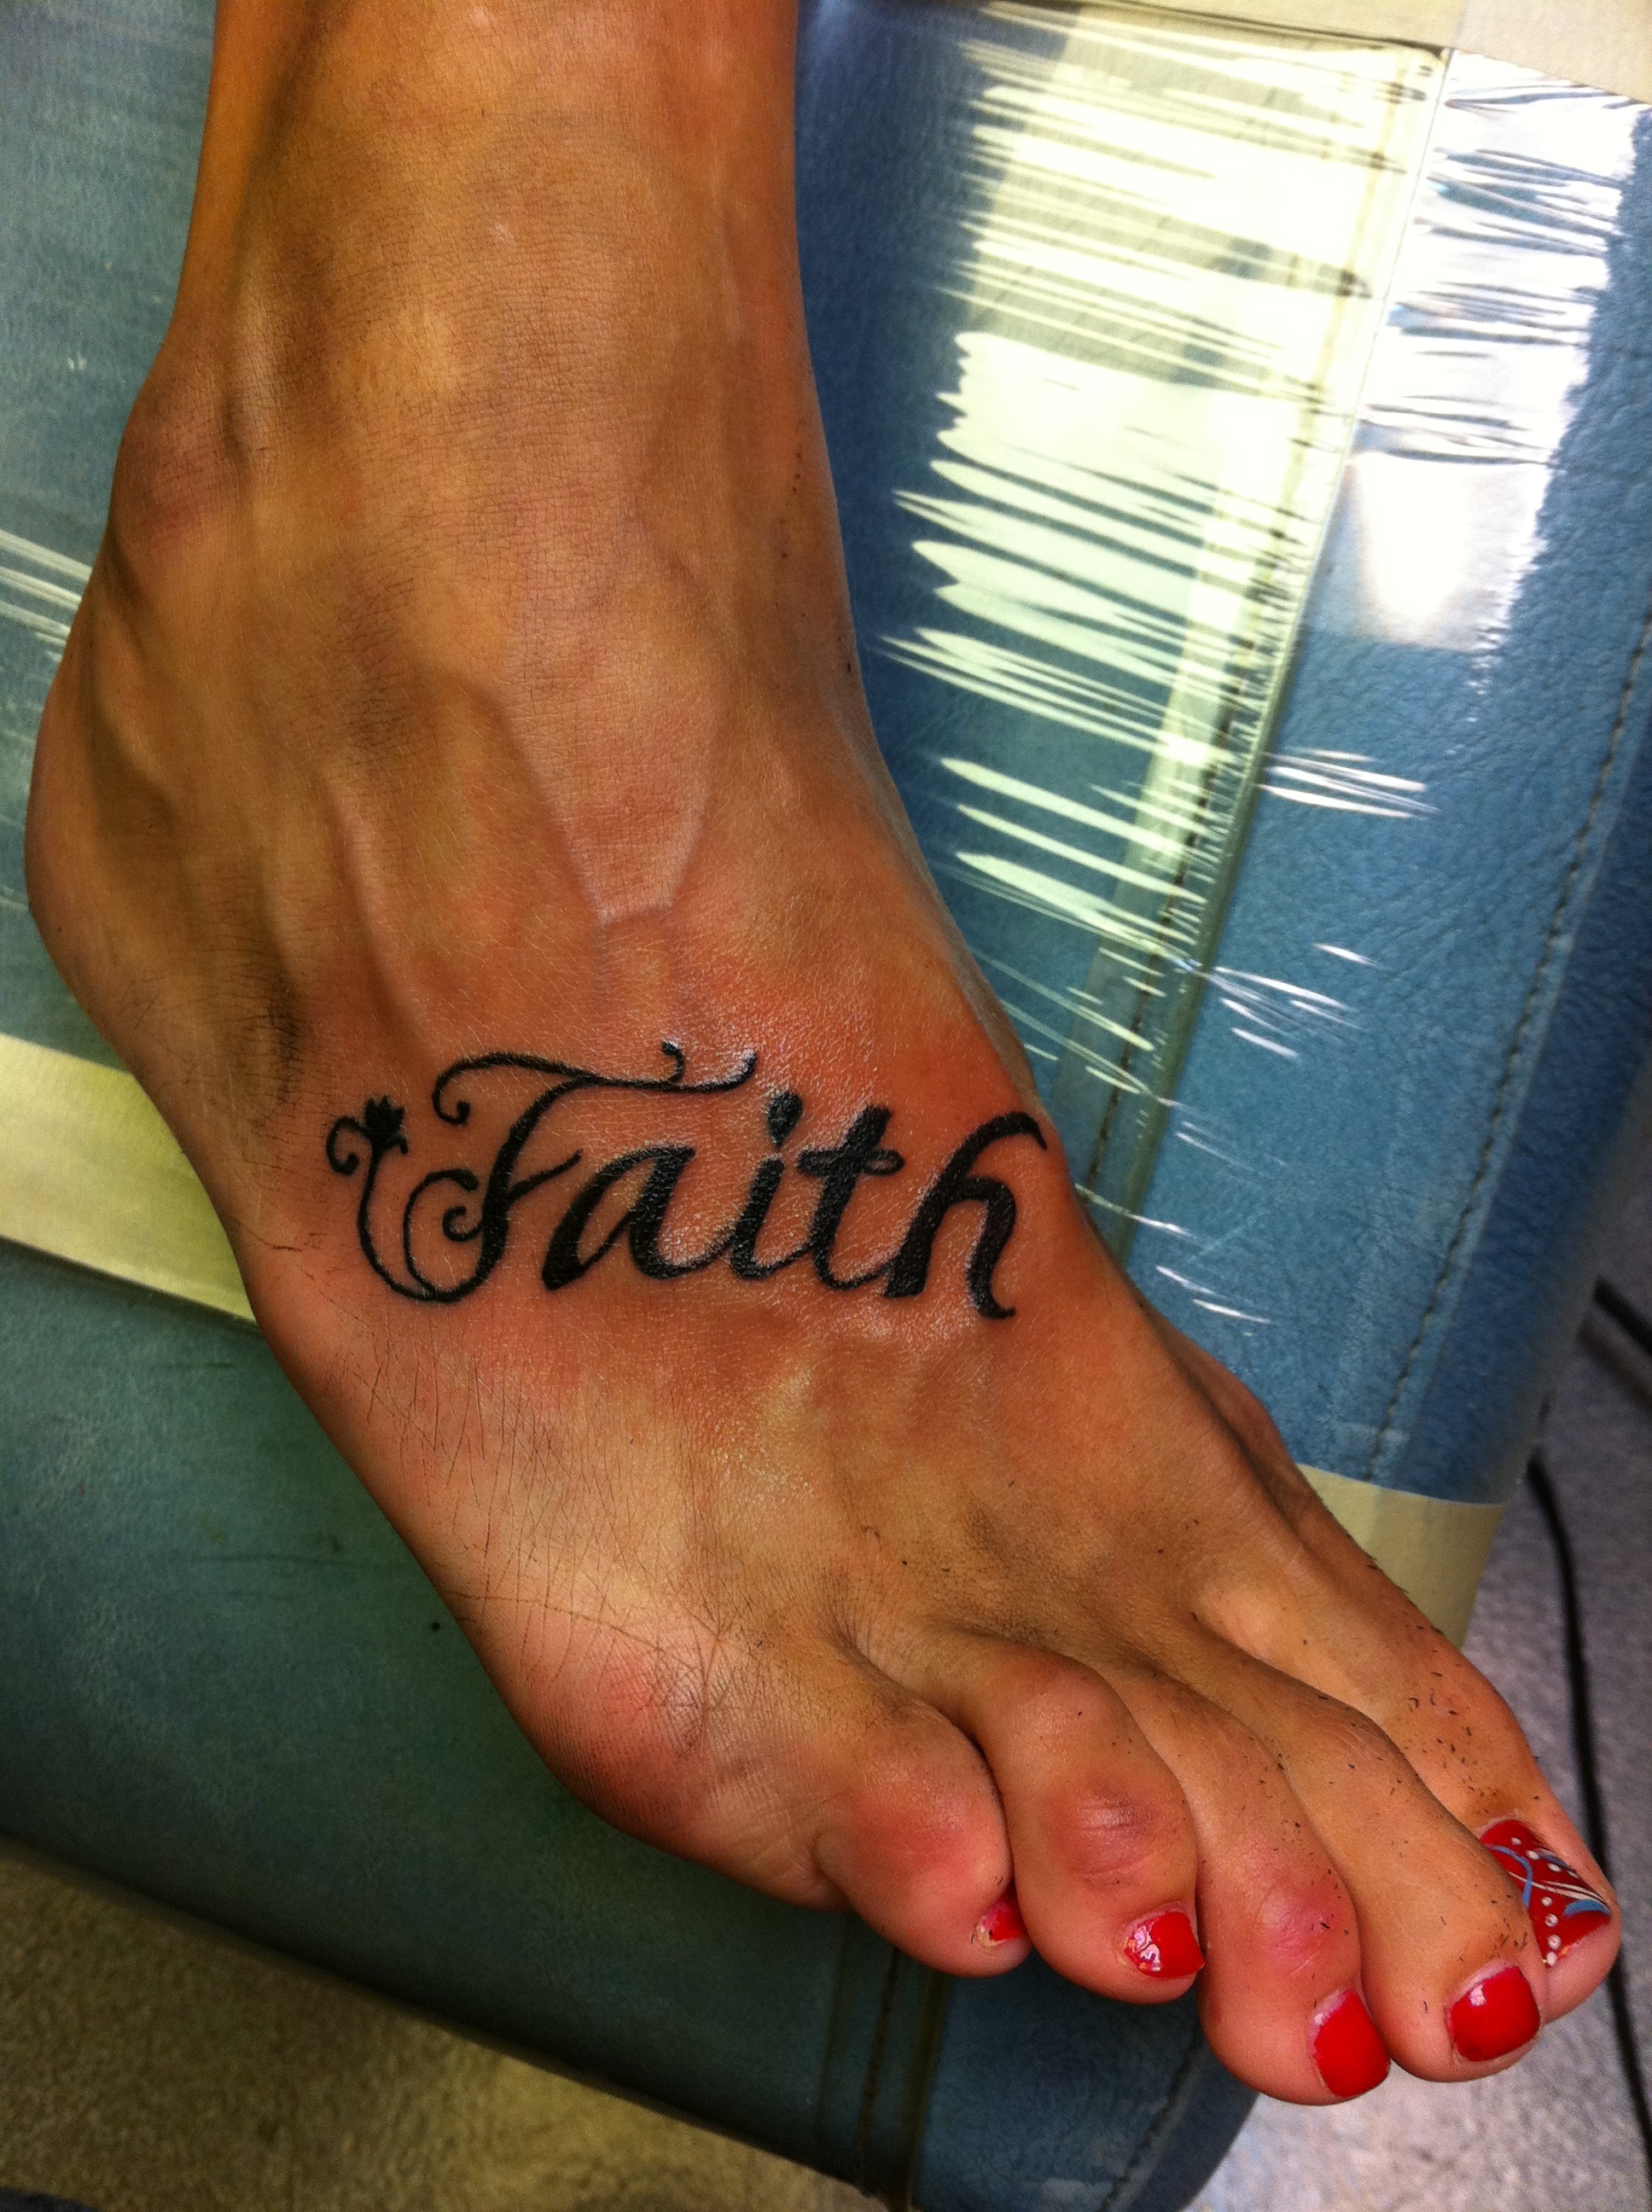 Faith Tattoos Designs, Ideas and Meaning | Tattoos For You